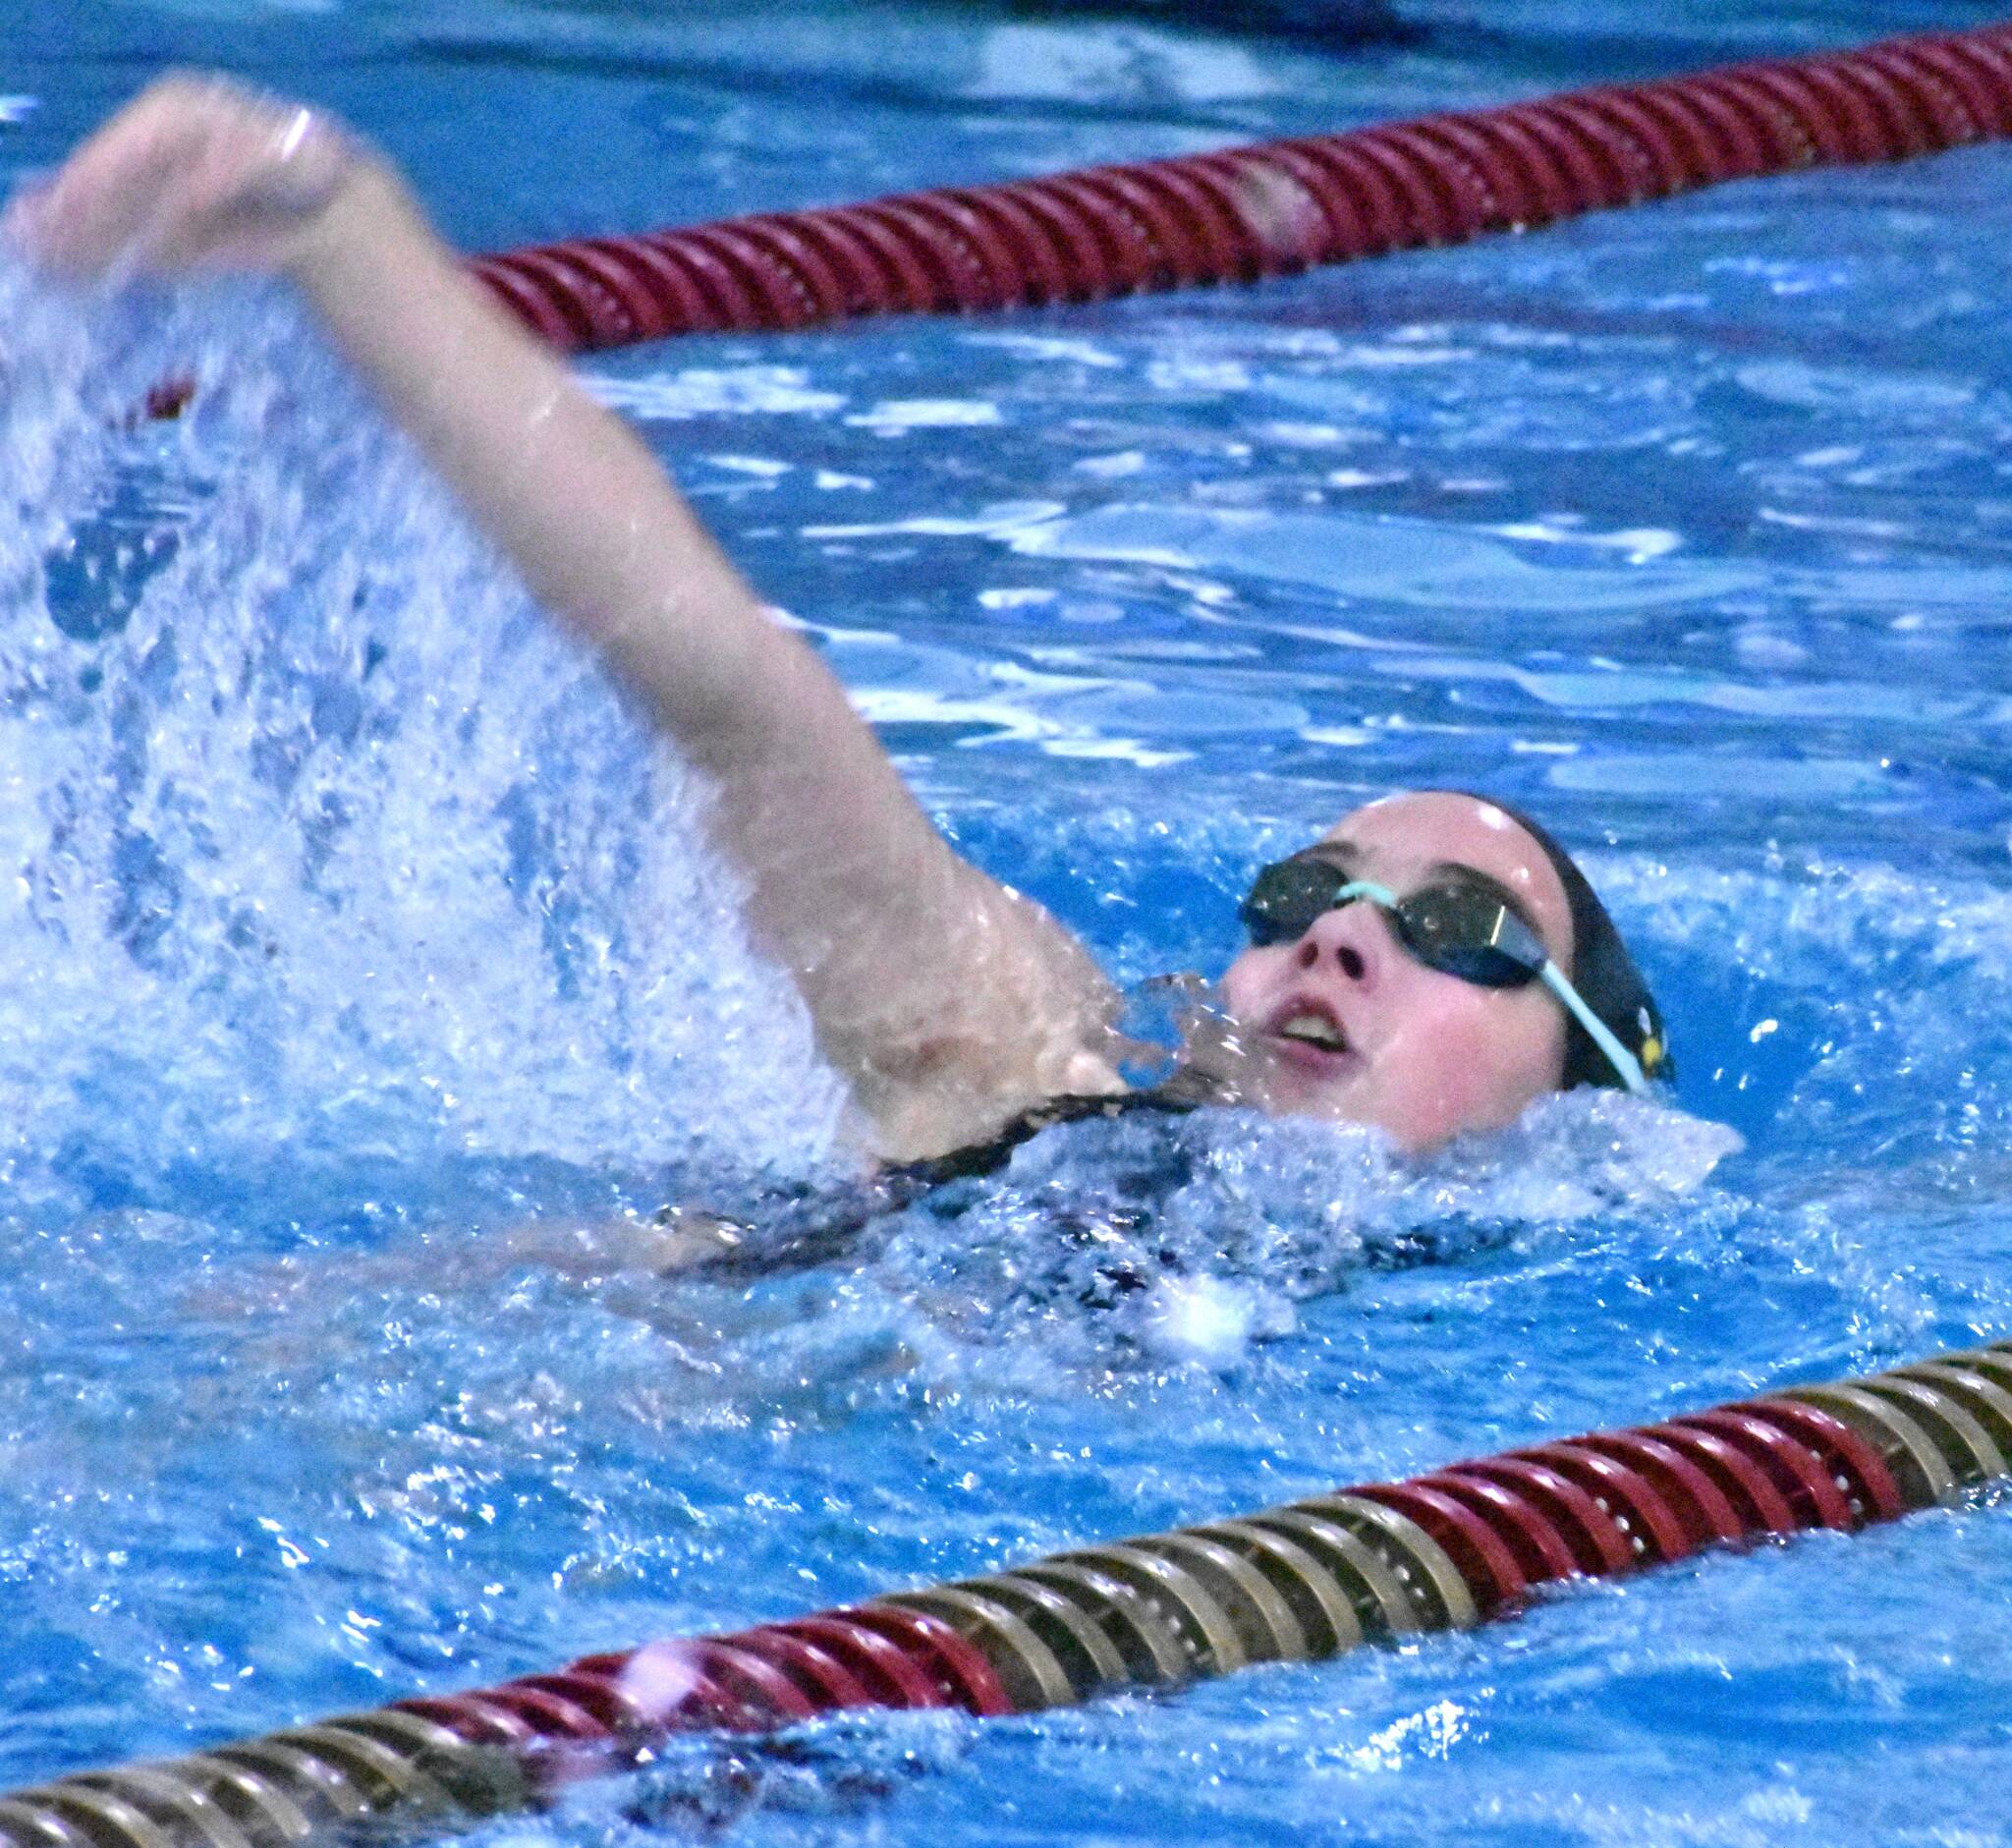 PHOTO BY KEVIN HANSON
Teams from Enumclaw, White River and Fife gathered September 14 at the Enumclaw Aquatic Center for an afternoon of competition. Pictured: EHS swimmer Alexandra Levesh swims the backstroke portion of the 200-yard individual medley which she won with a state-qualifying time. Meet details can be found in the Sports Roundup.